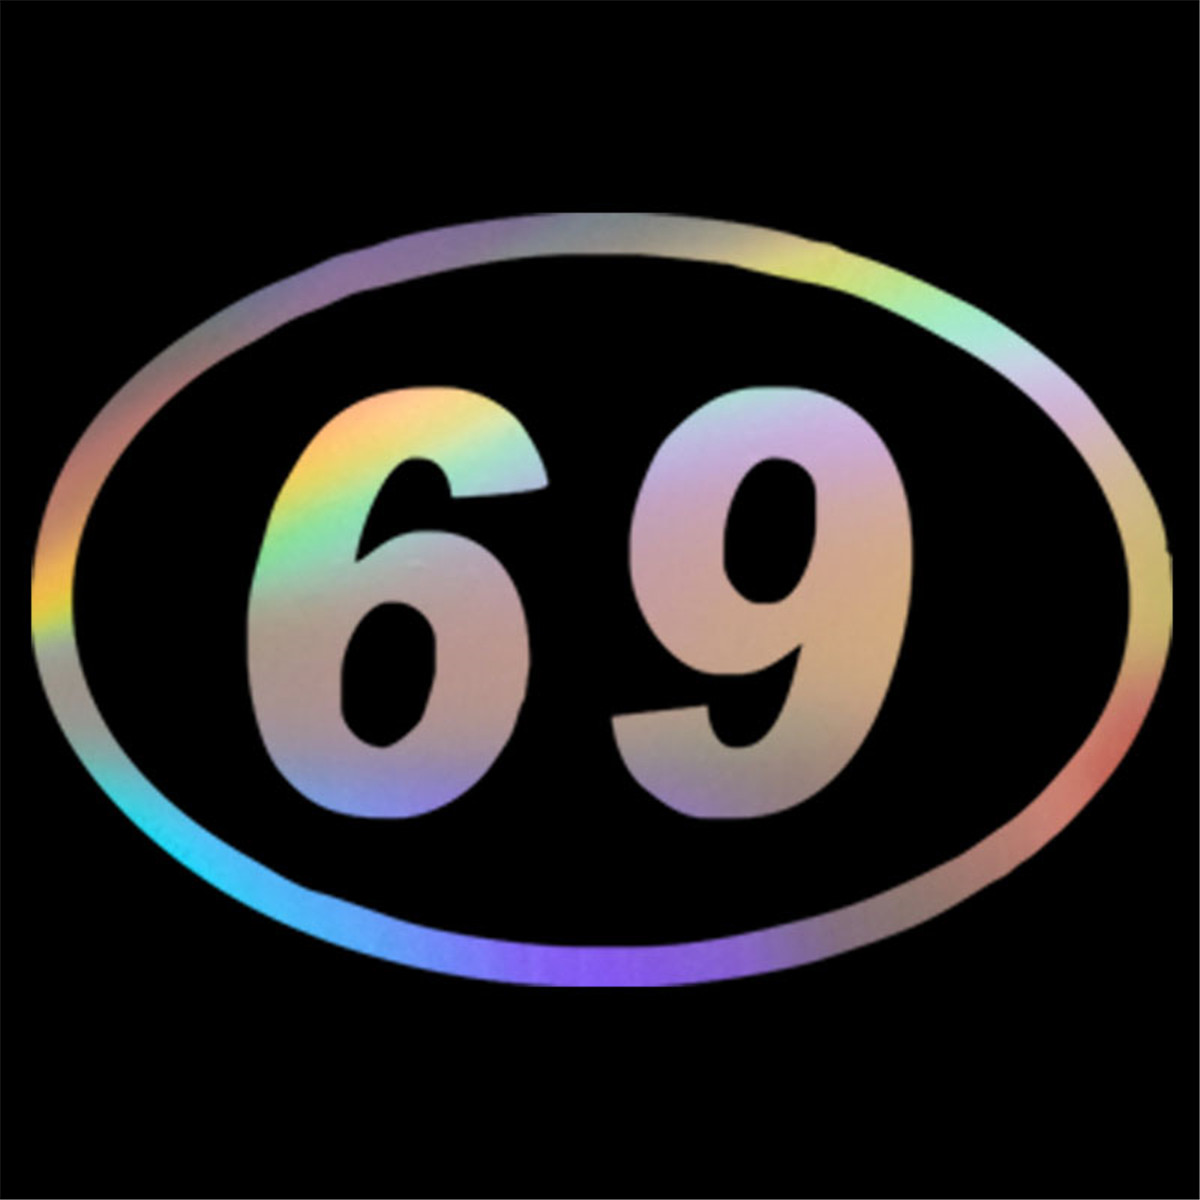 69 Sixty Nine Number Funny Oval Bumper Wall Stickers Car Vehicle Vinyl